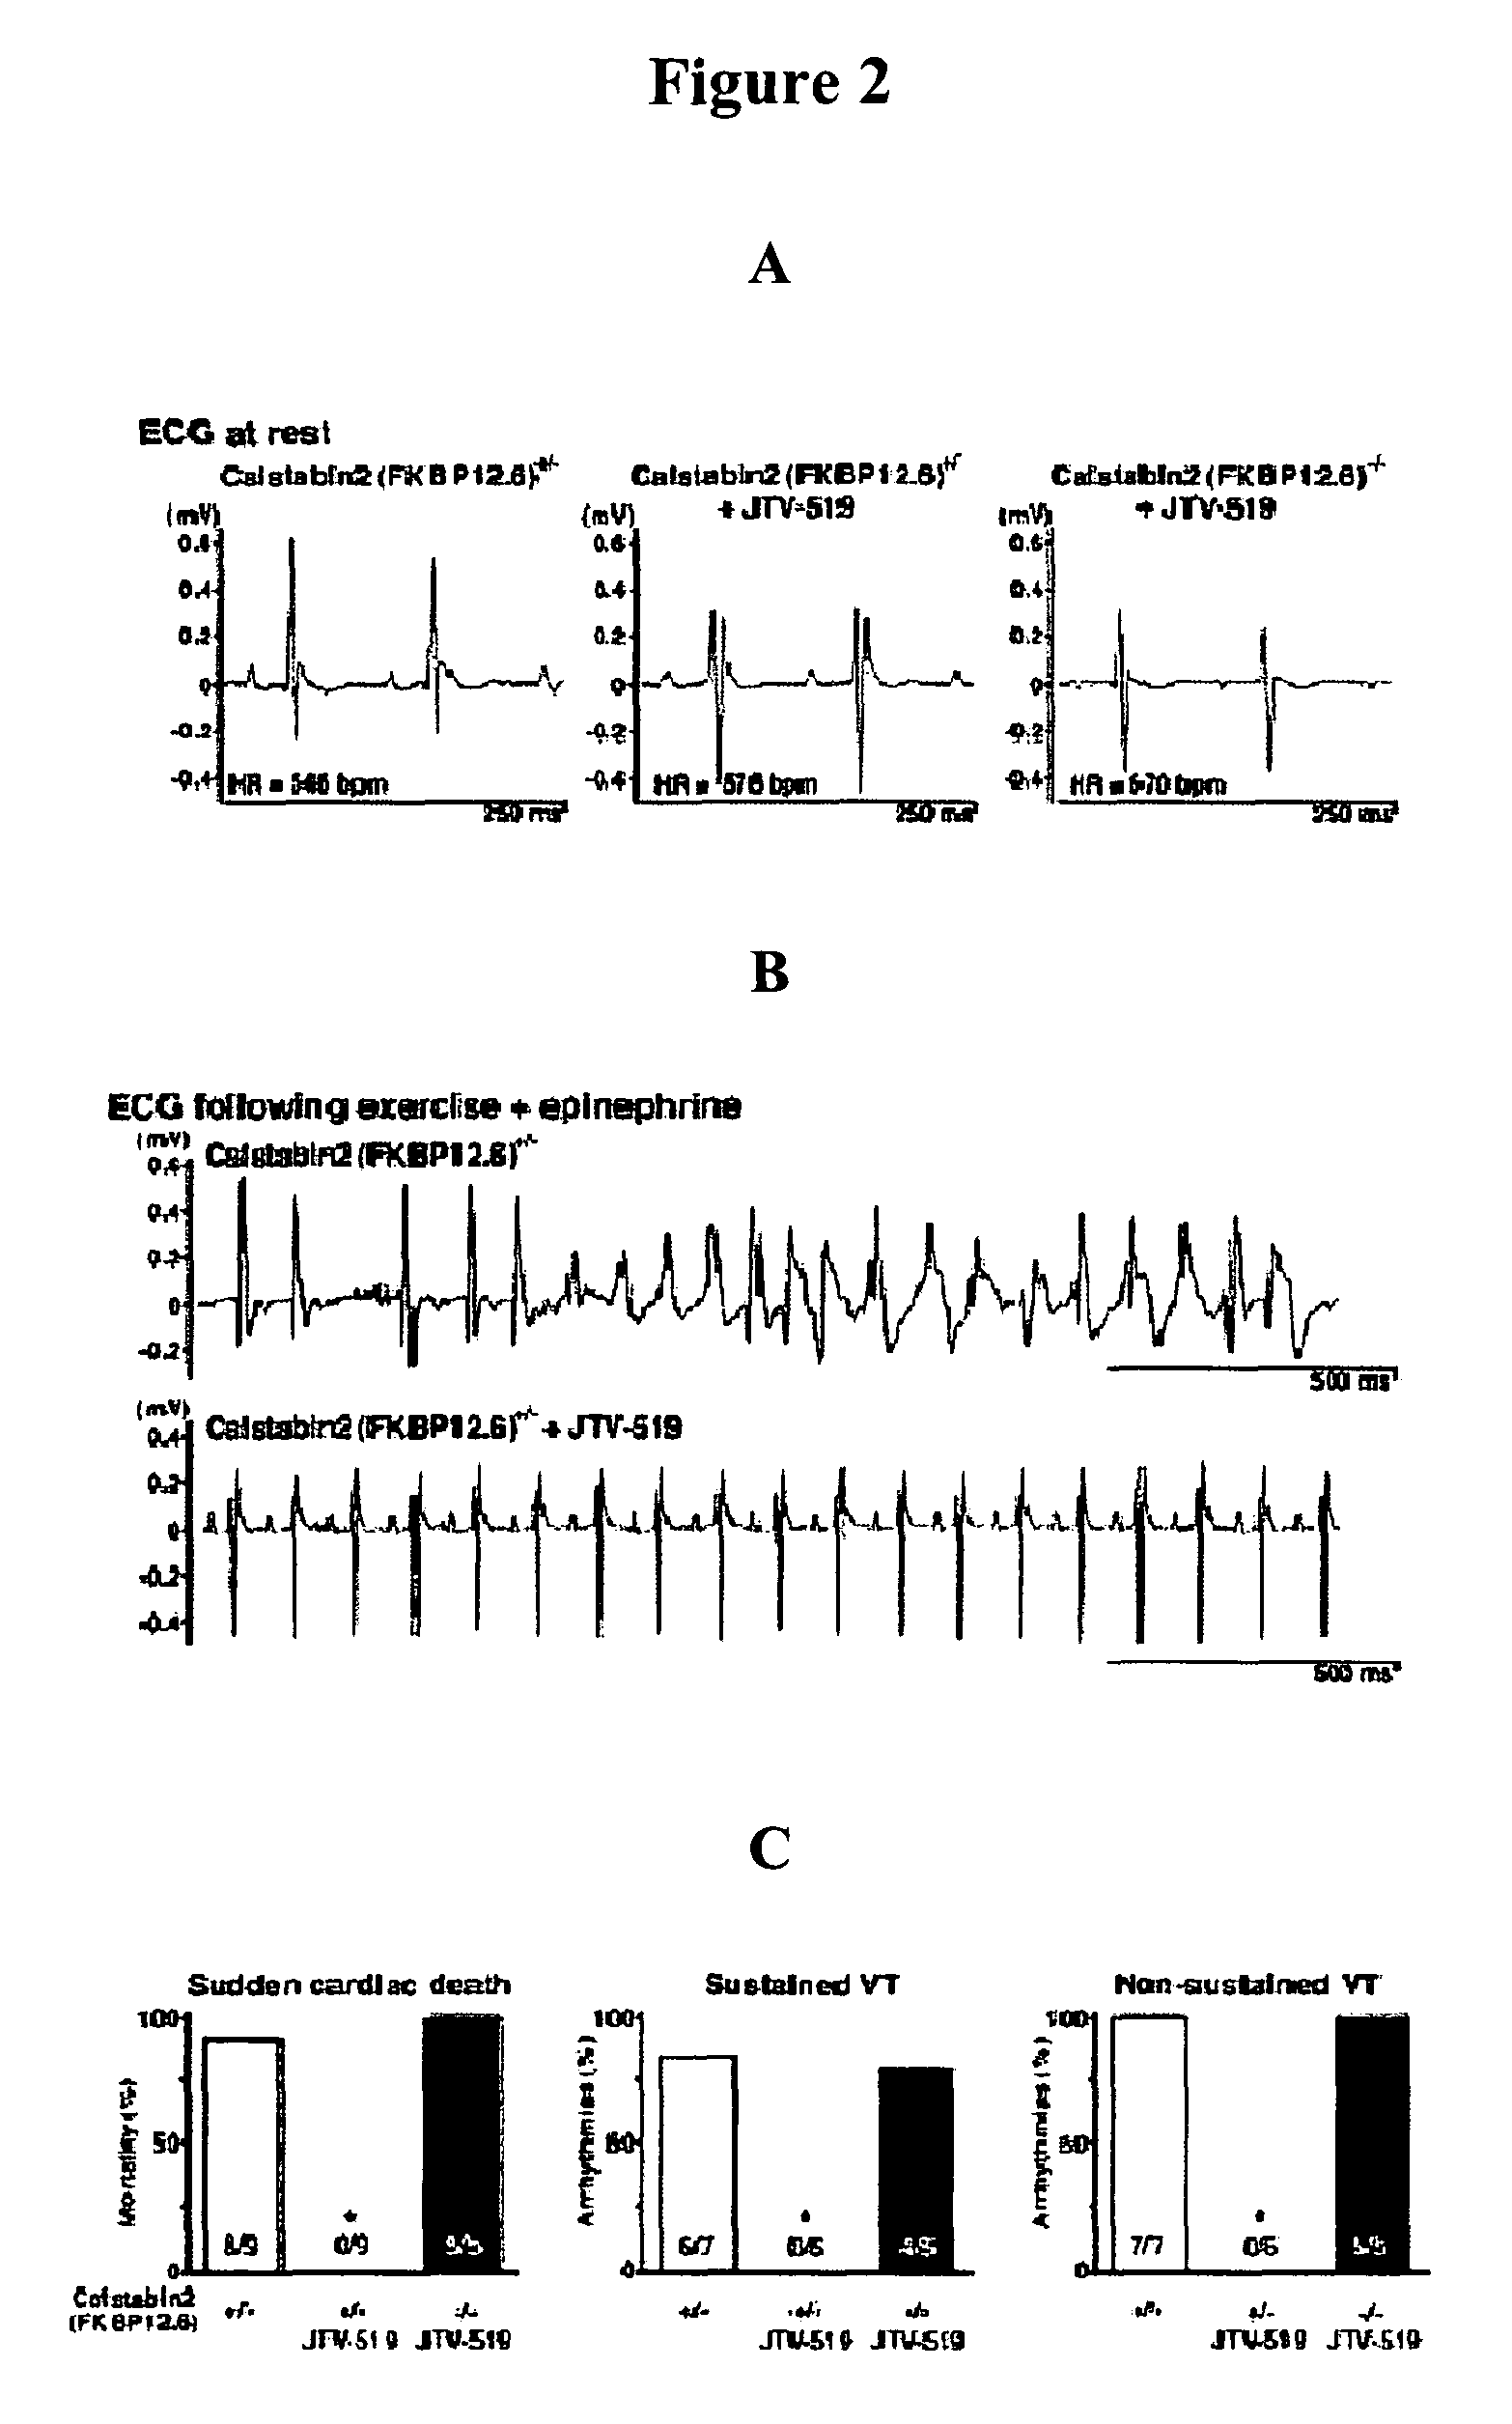 Agents for preventing and treating disorders involving modulation of the RyR receptors